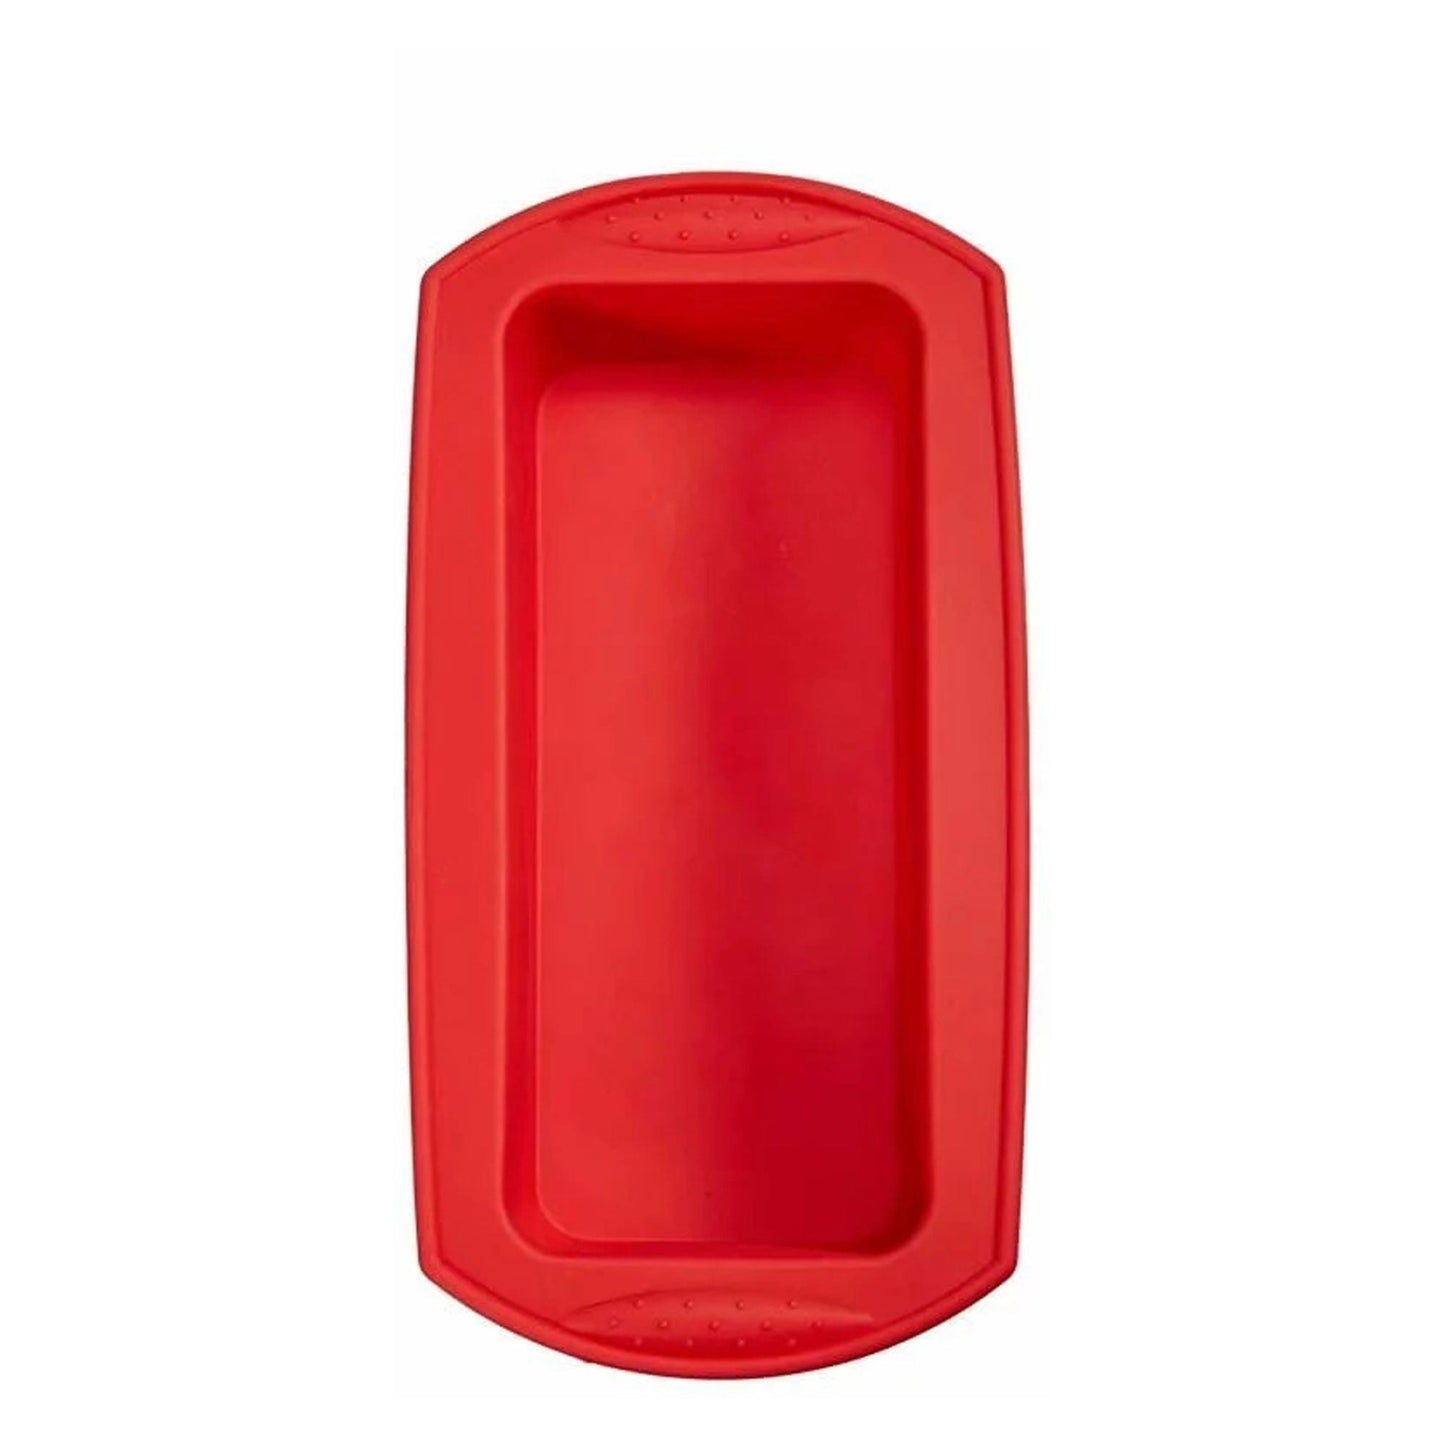 Loaf Silicone Baking Mold 8 Inch